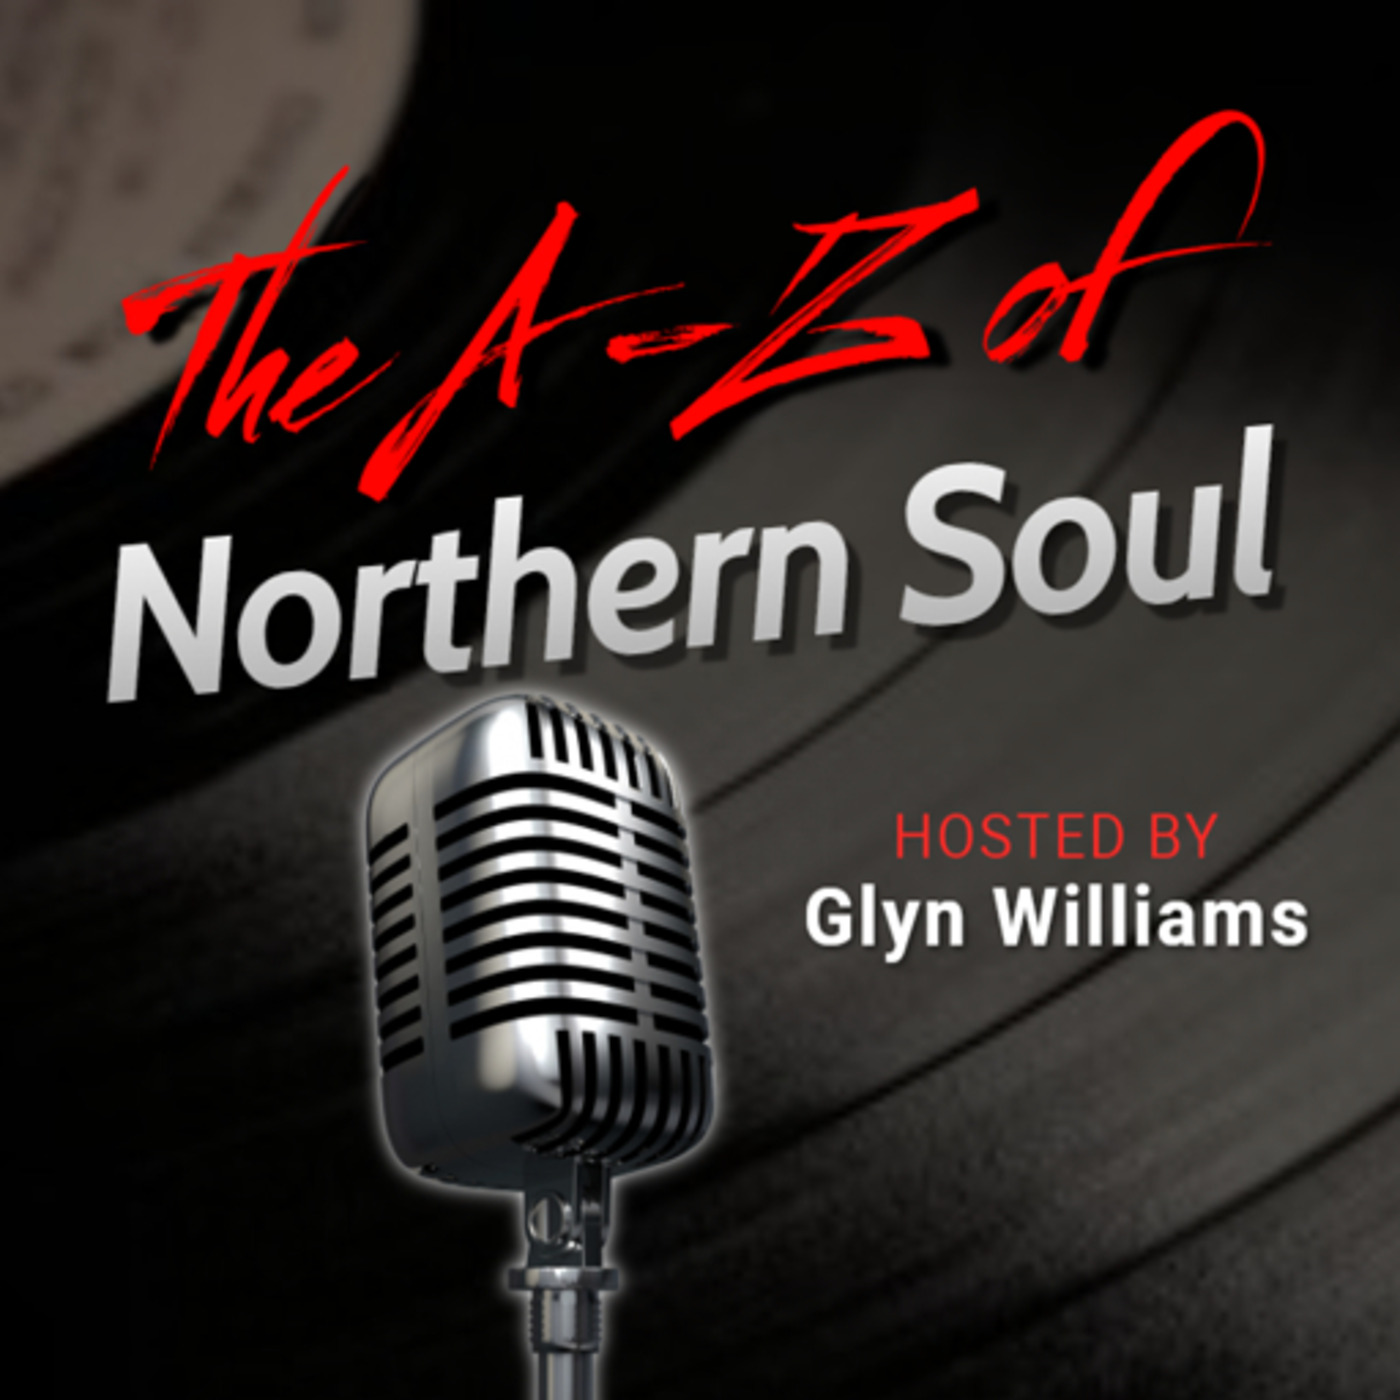 The A-Z of Northern Soul E064